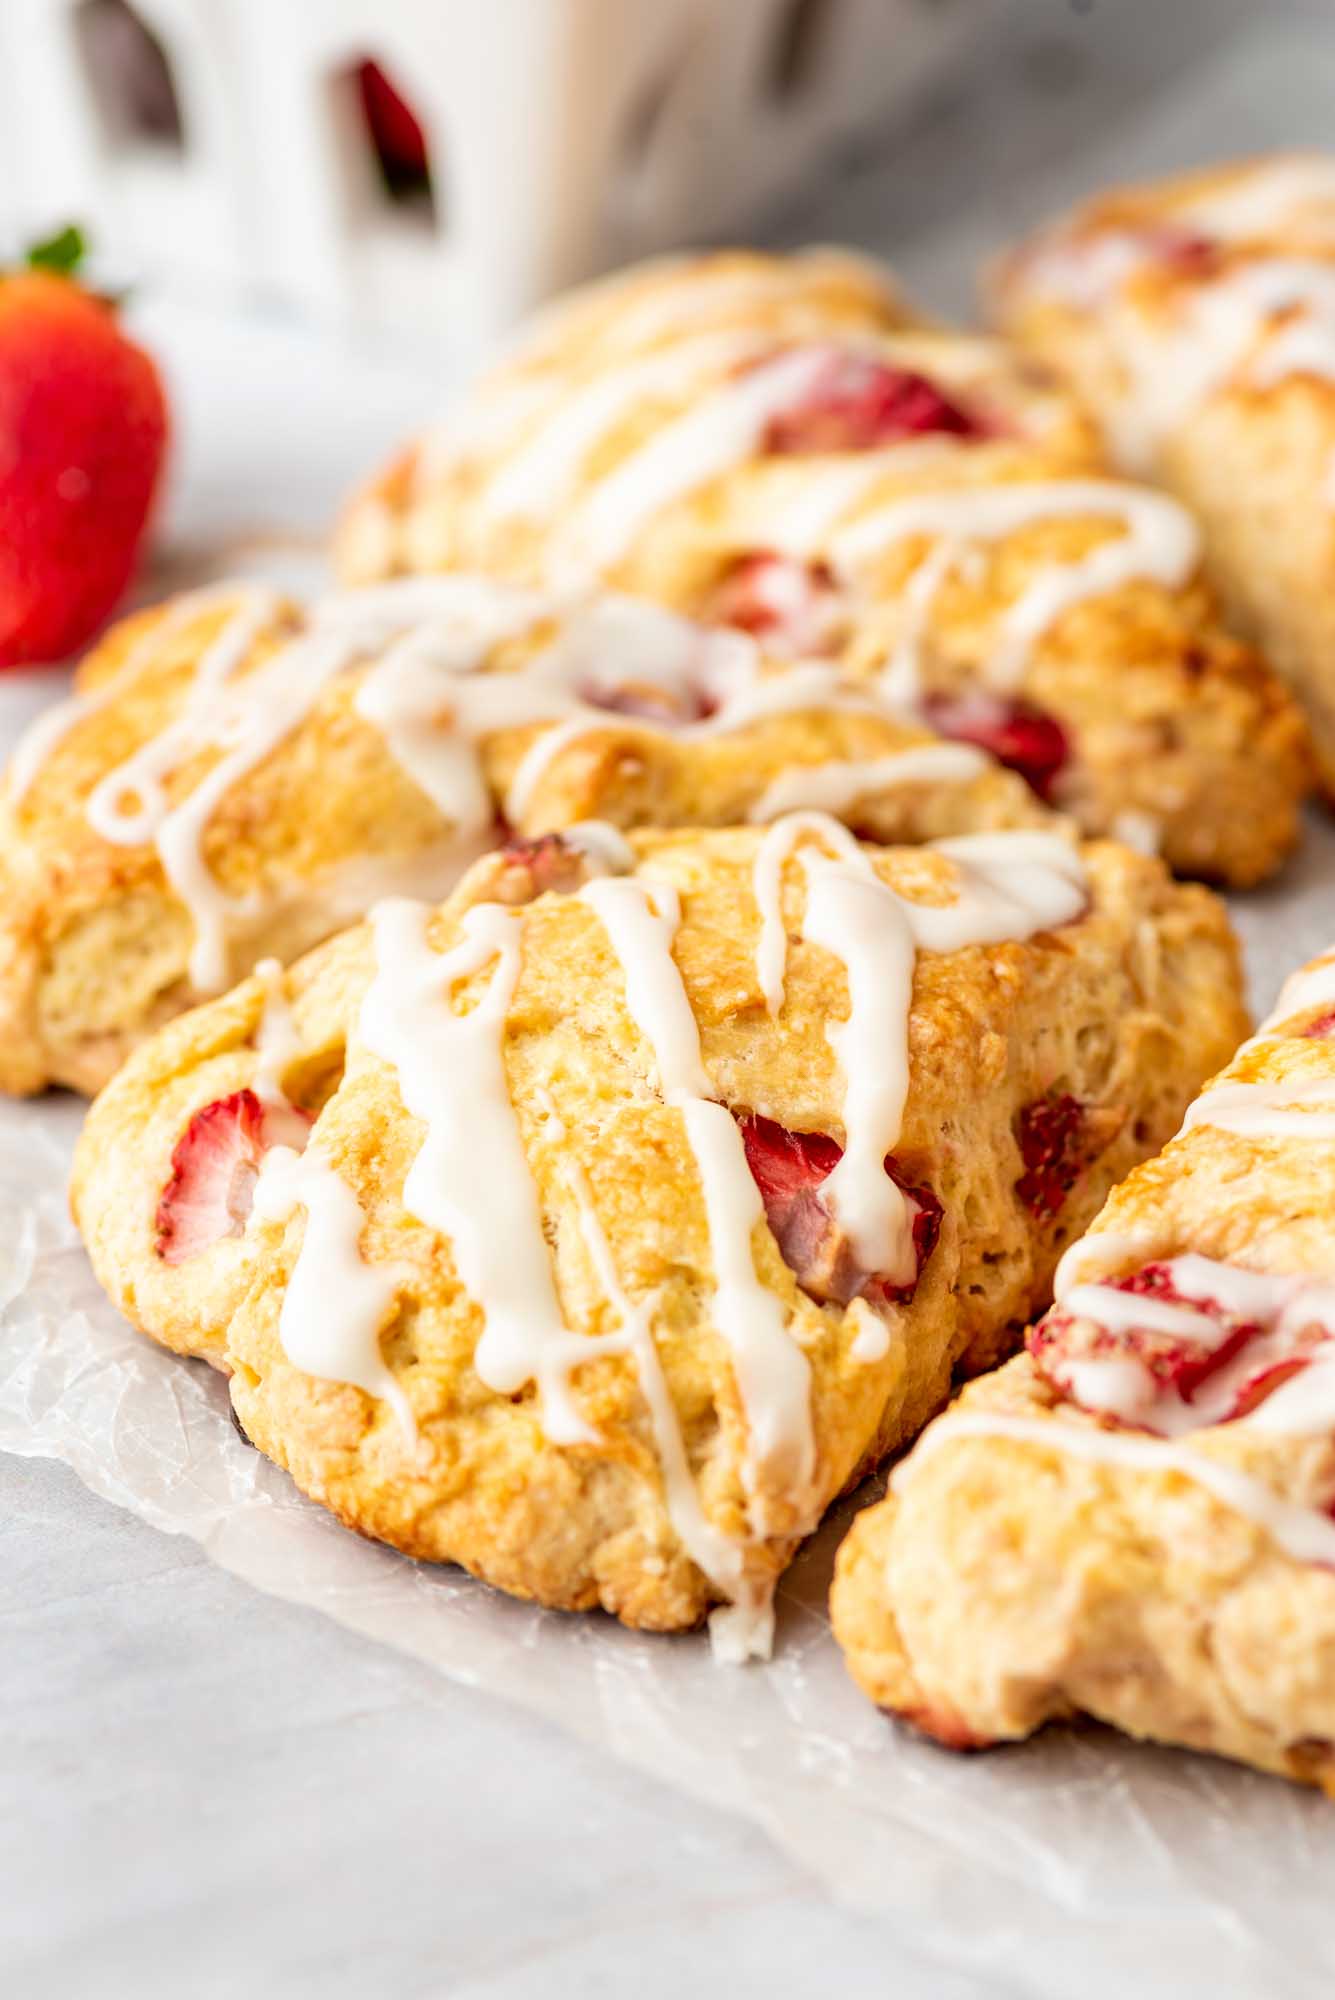 Straberry scones with white vanilla drizzle, and fresh strawberry in the background